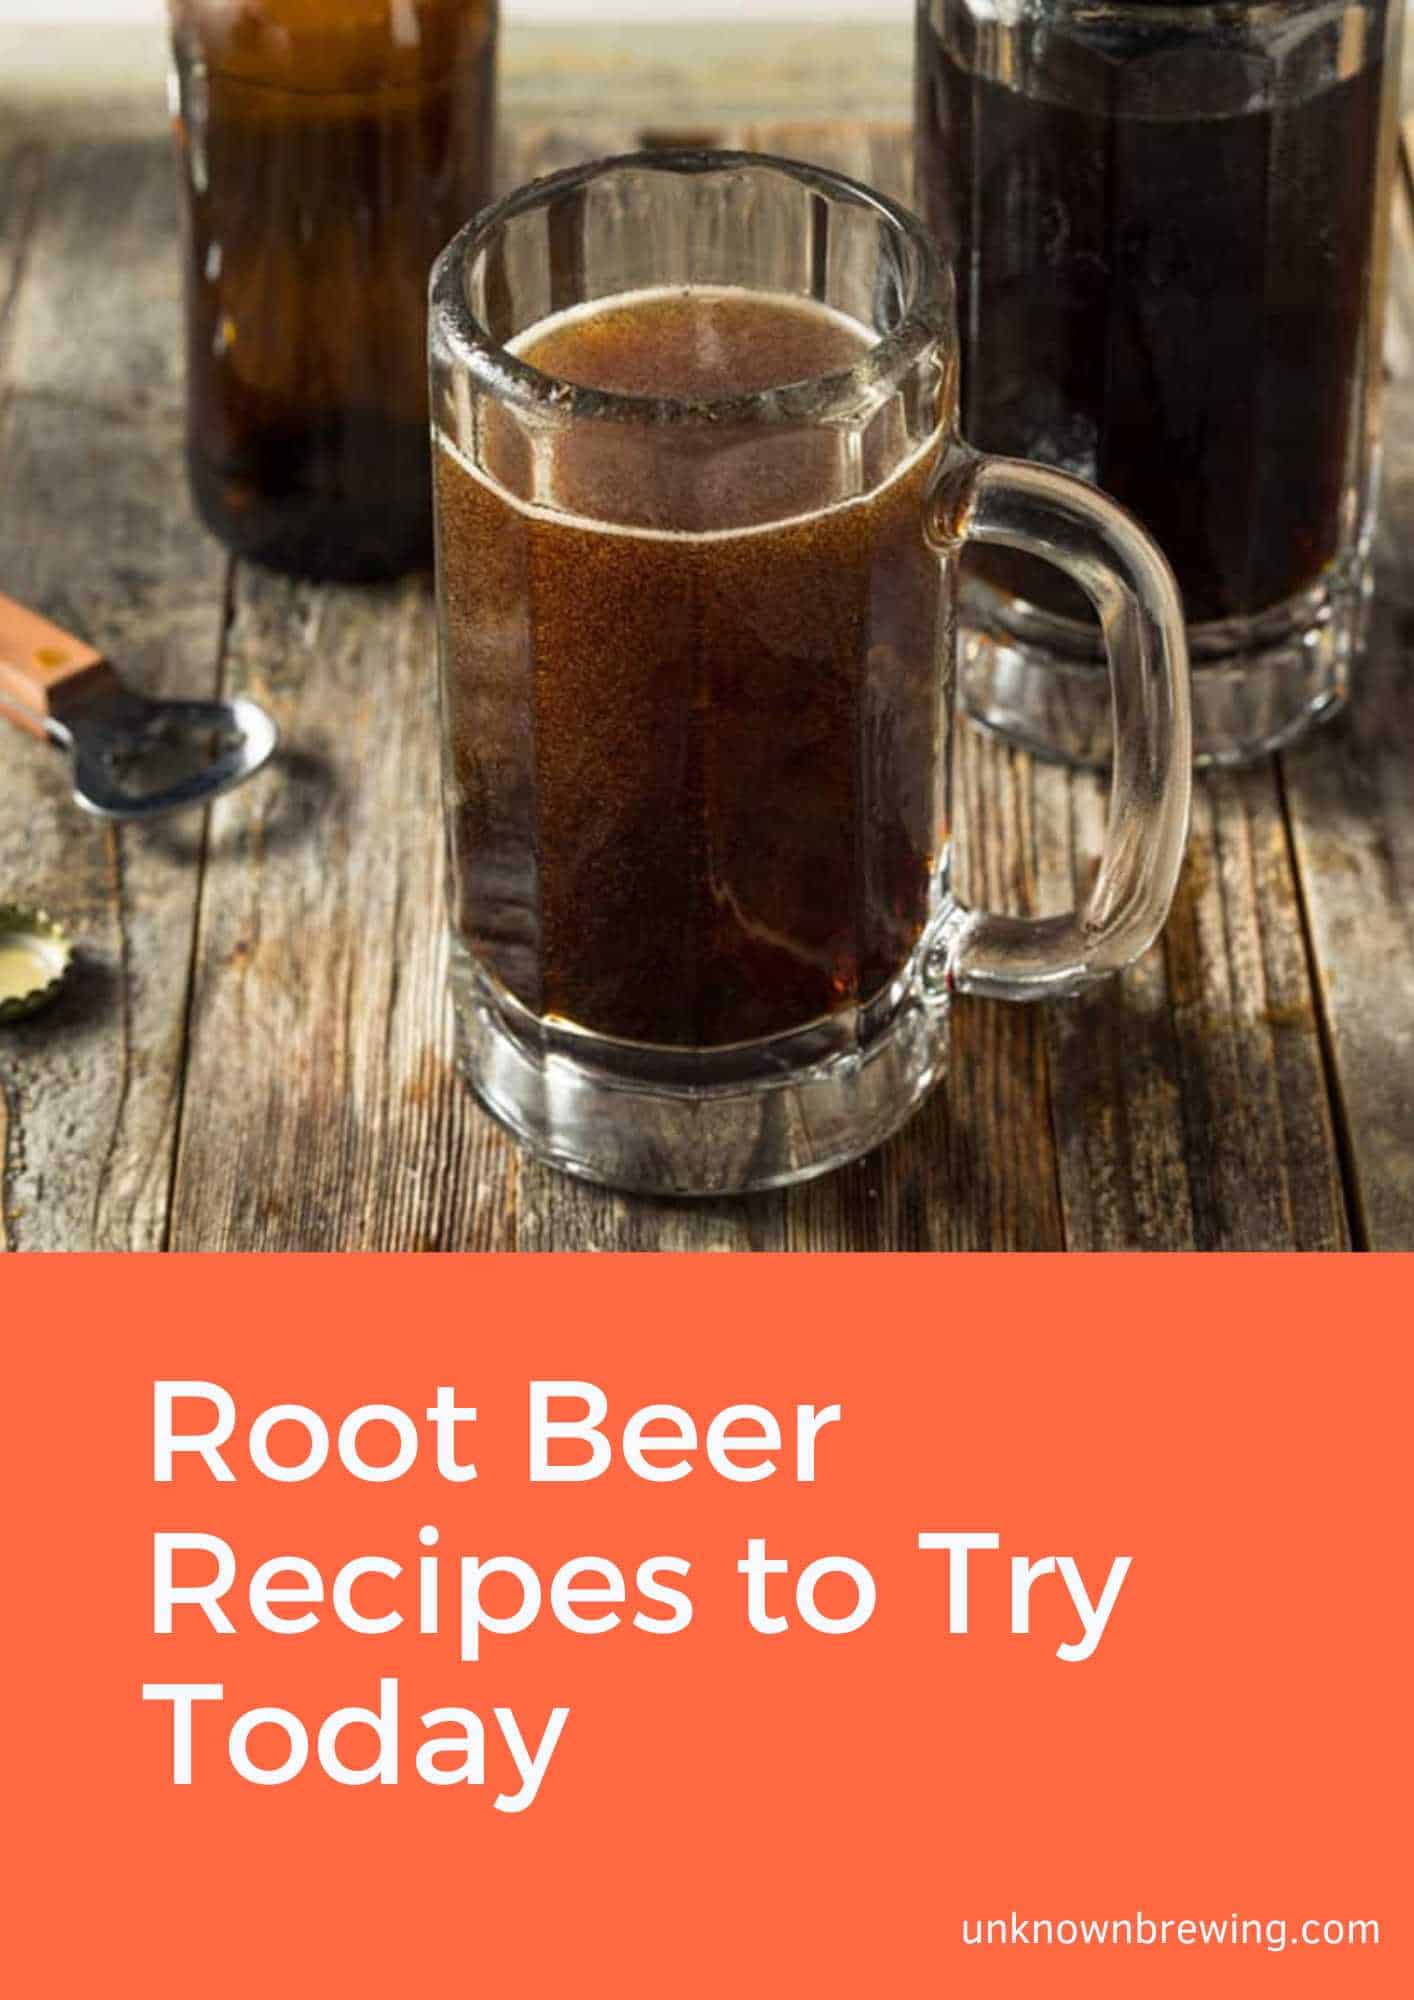 Root Beer Recipes to Try Today